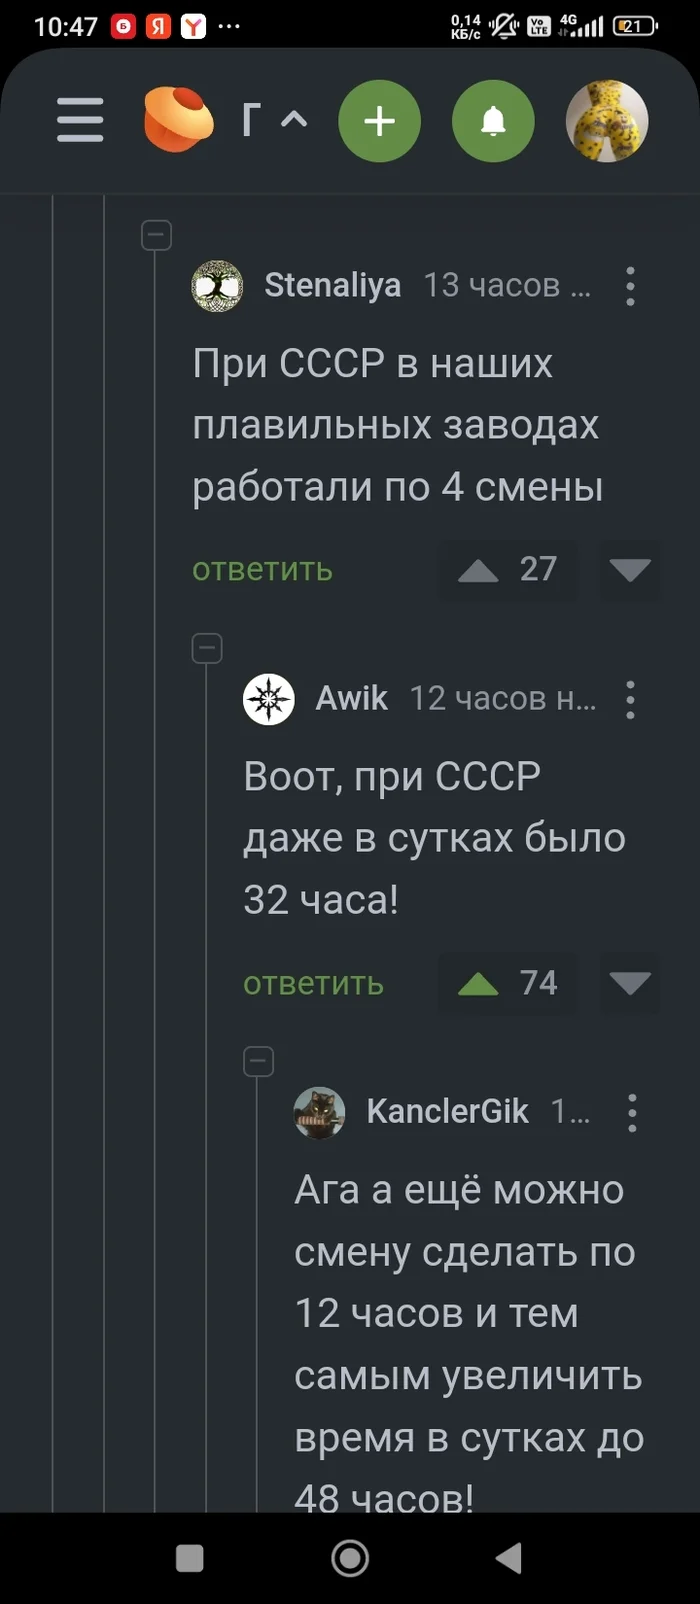 But under the USSR it was better - the USSR, Screenshot, Comments on Peekaboo, Short post, Longpost